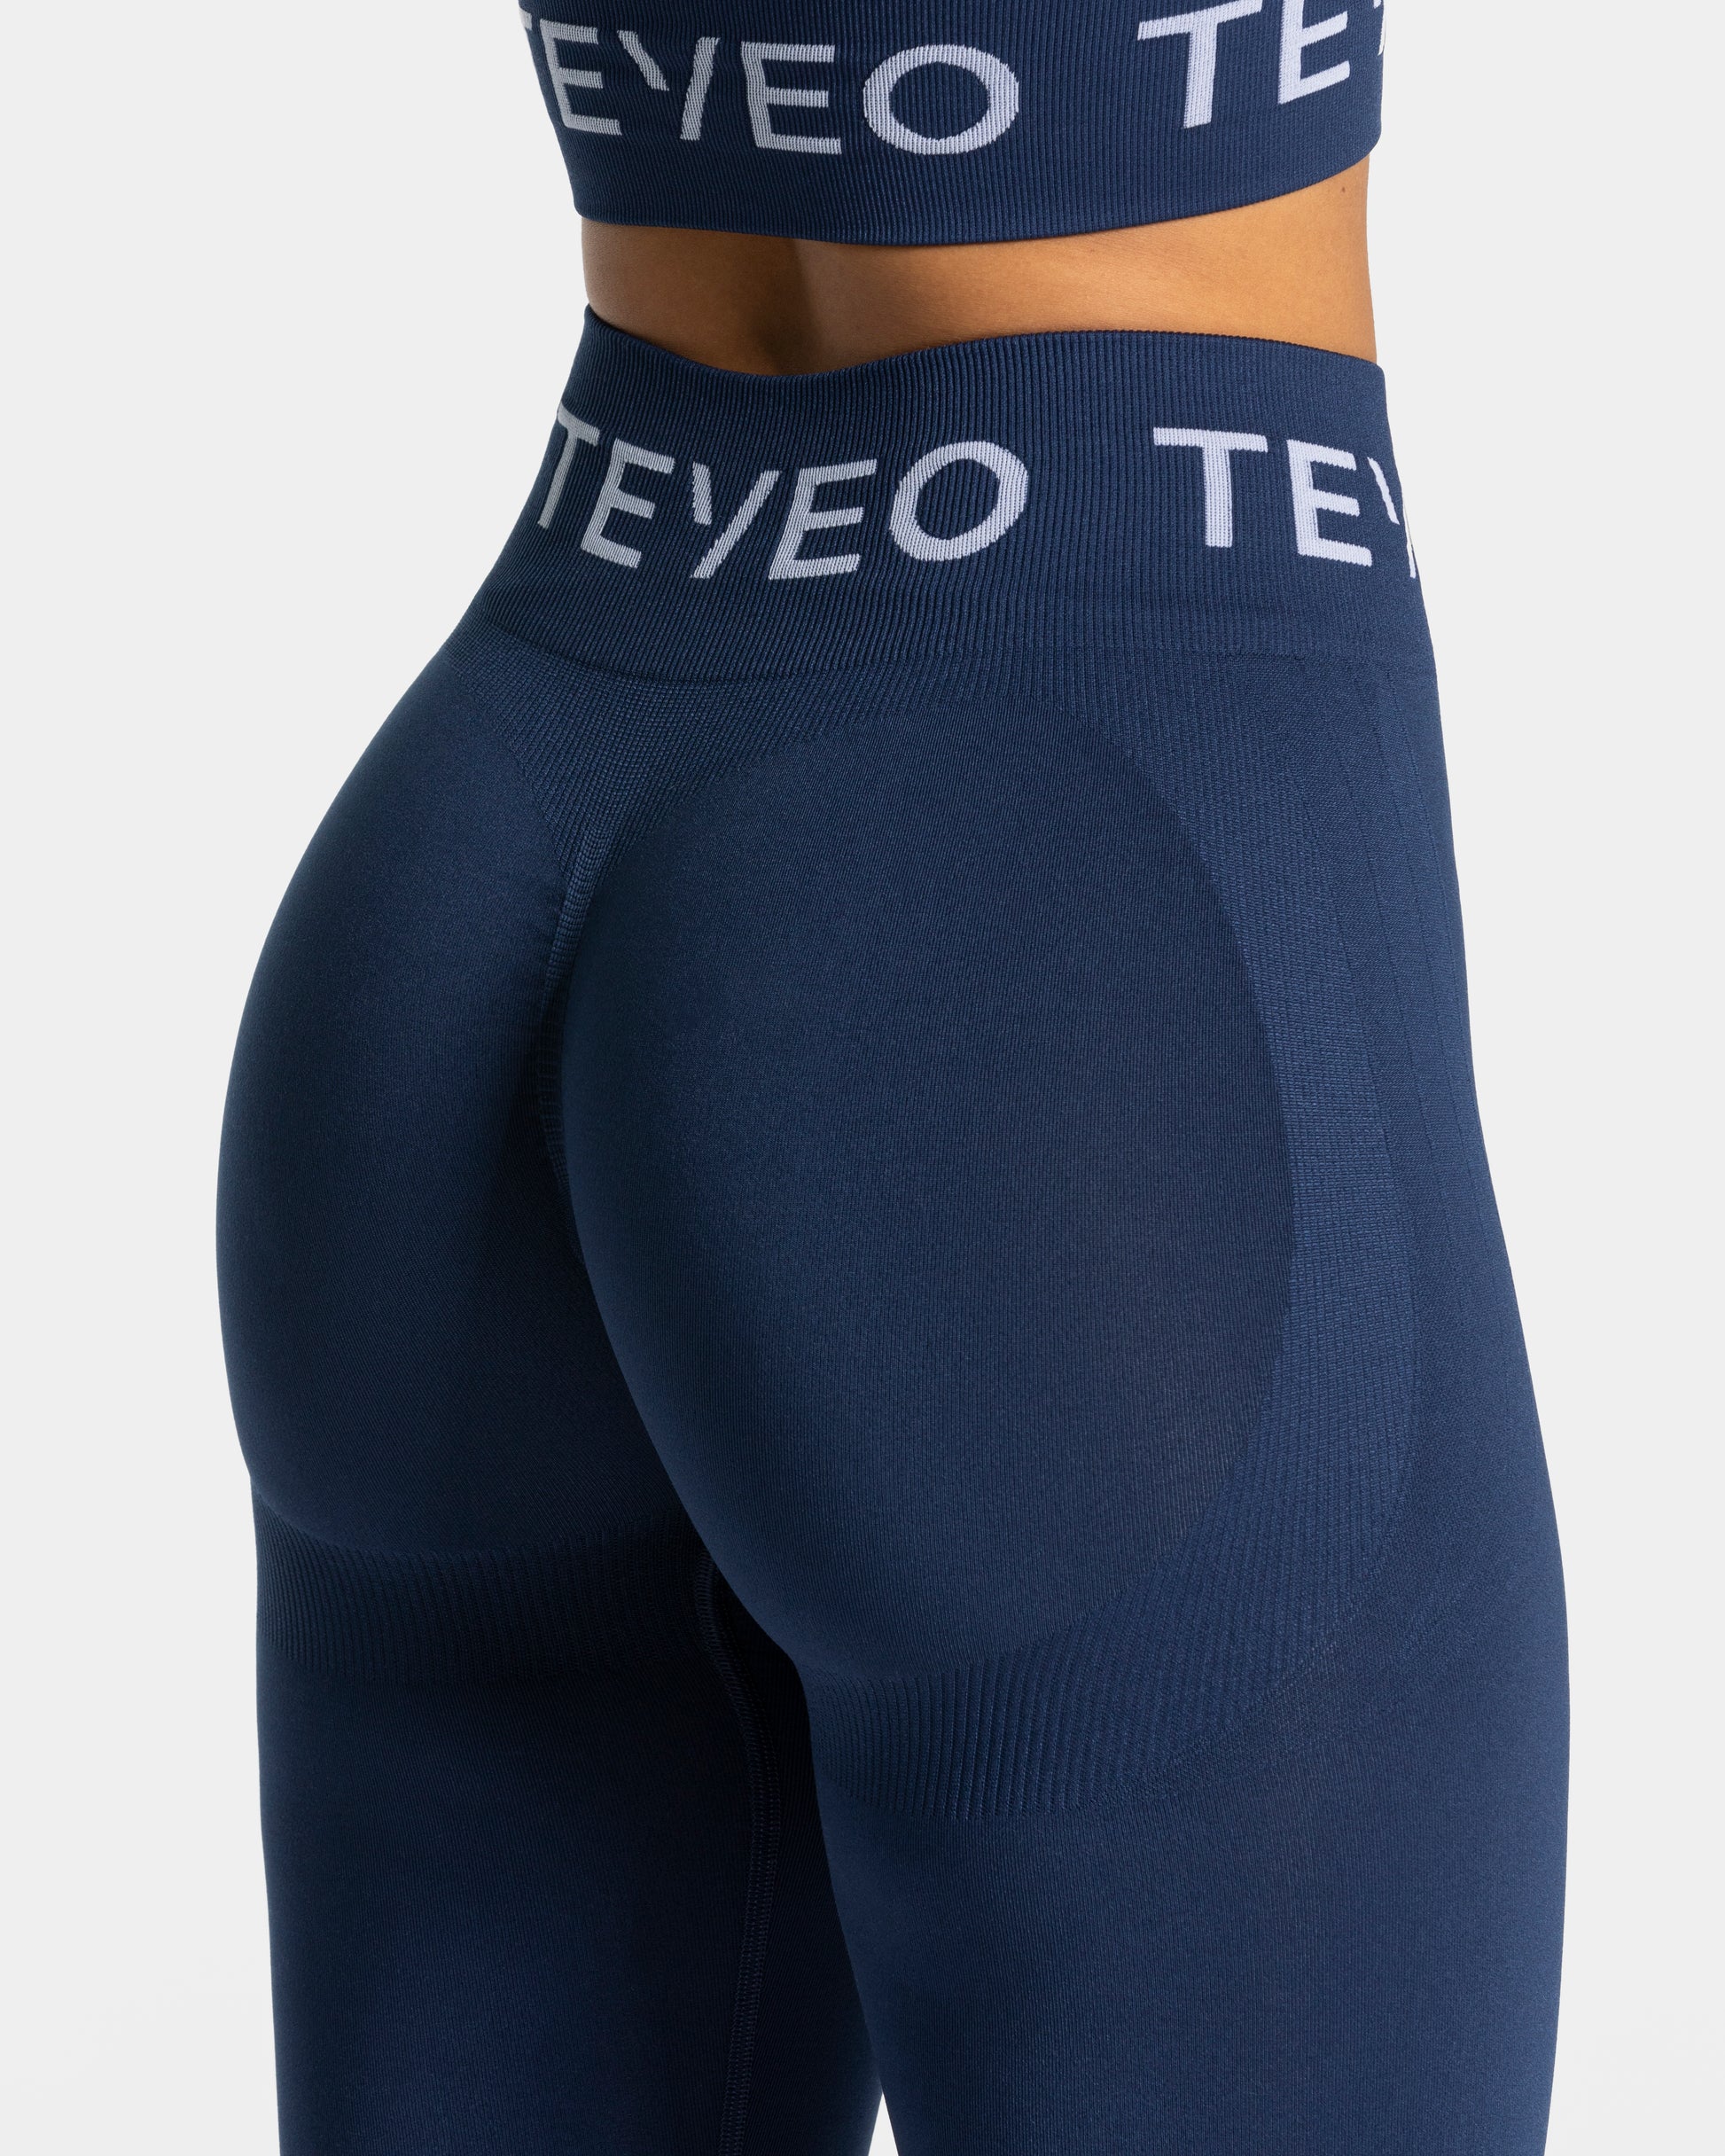 Official Signature TEVEO – | Store \